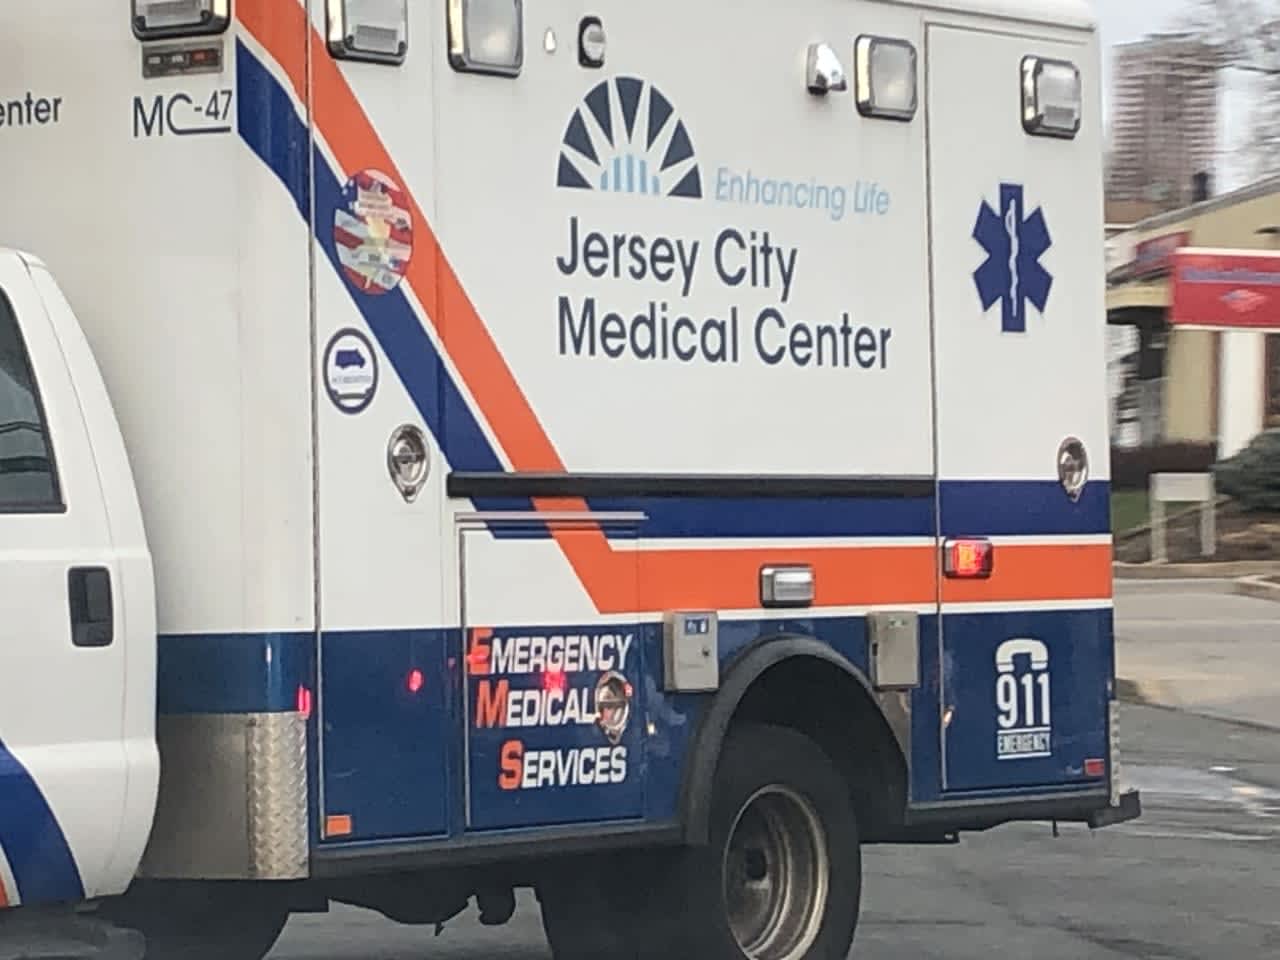 The woman was transported by EMS to Jersey City Medical Center for treatment of an undisclosed medical condition, the prosecutor's office said.